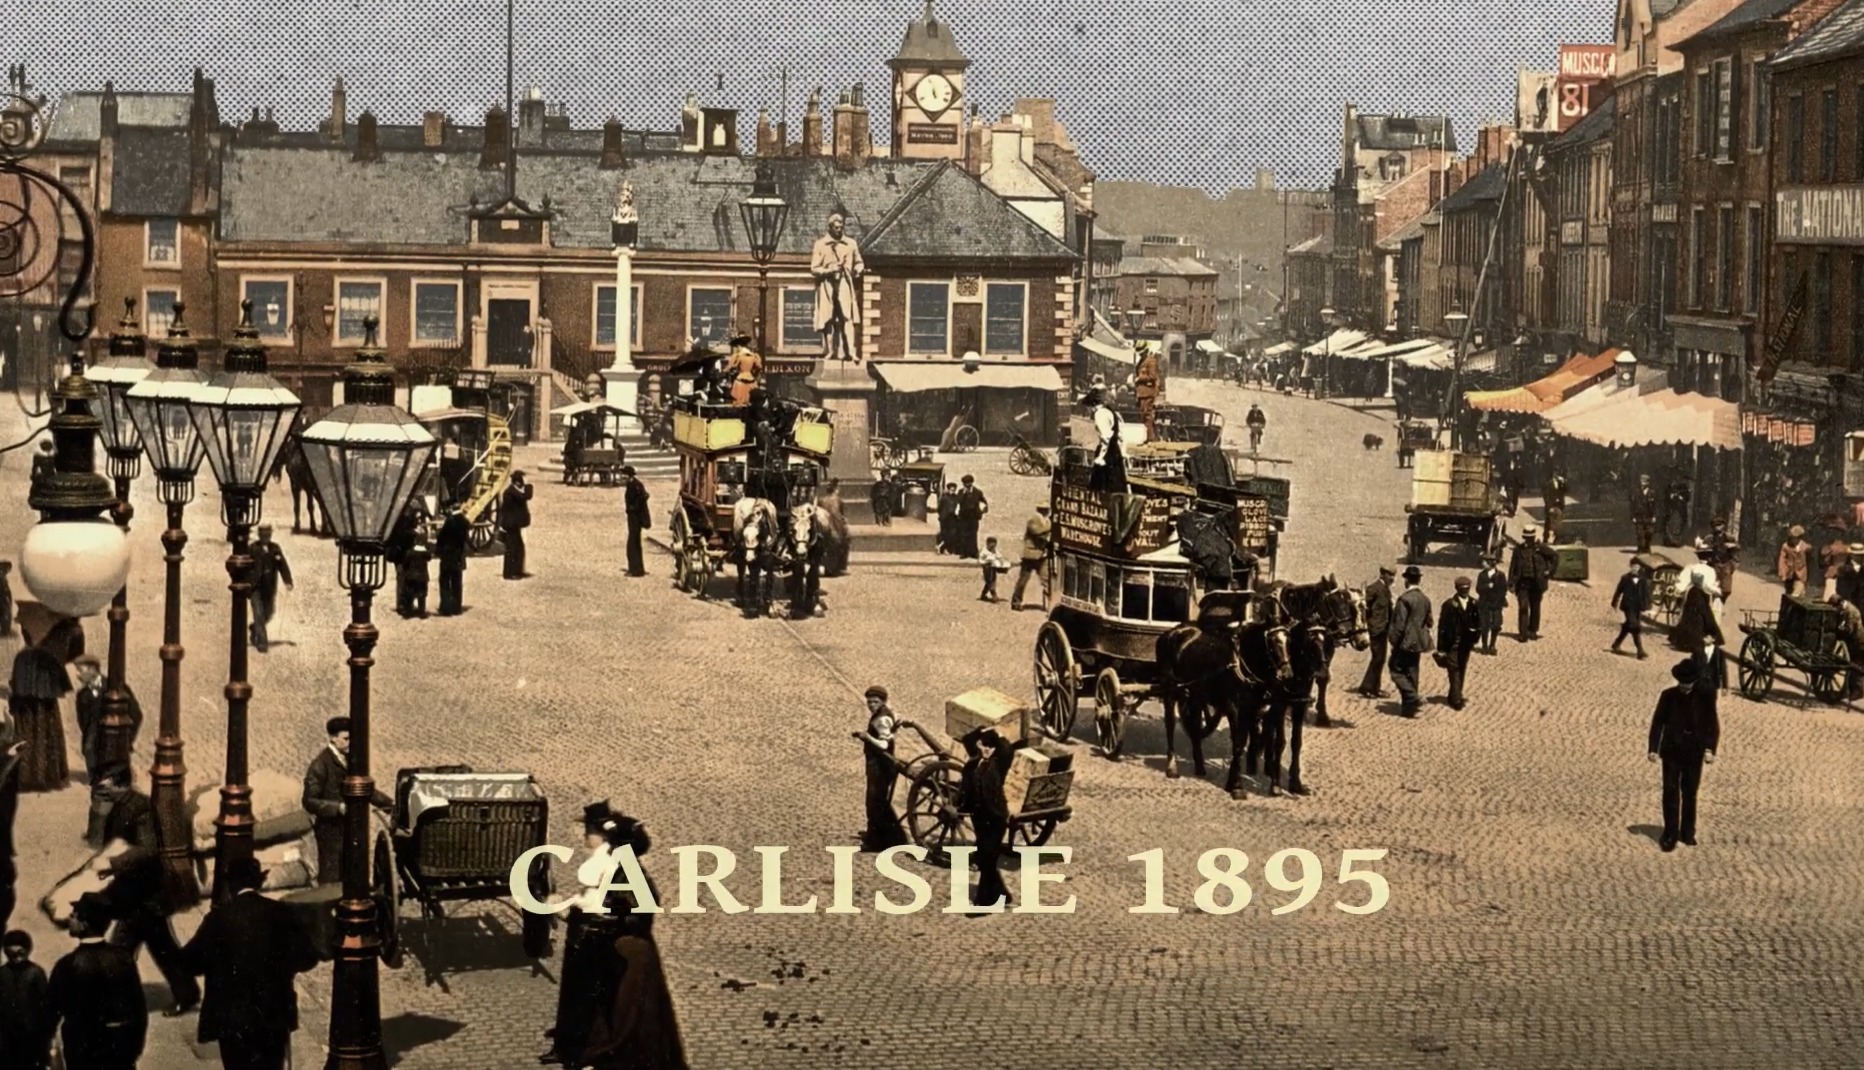 Bustling centre: The opening sequence of the opera, an animation of Carlisle in 1895